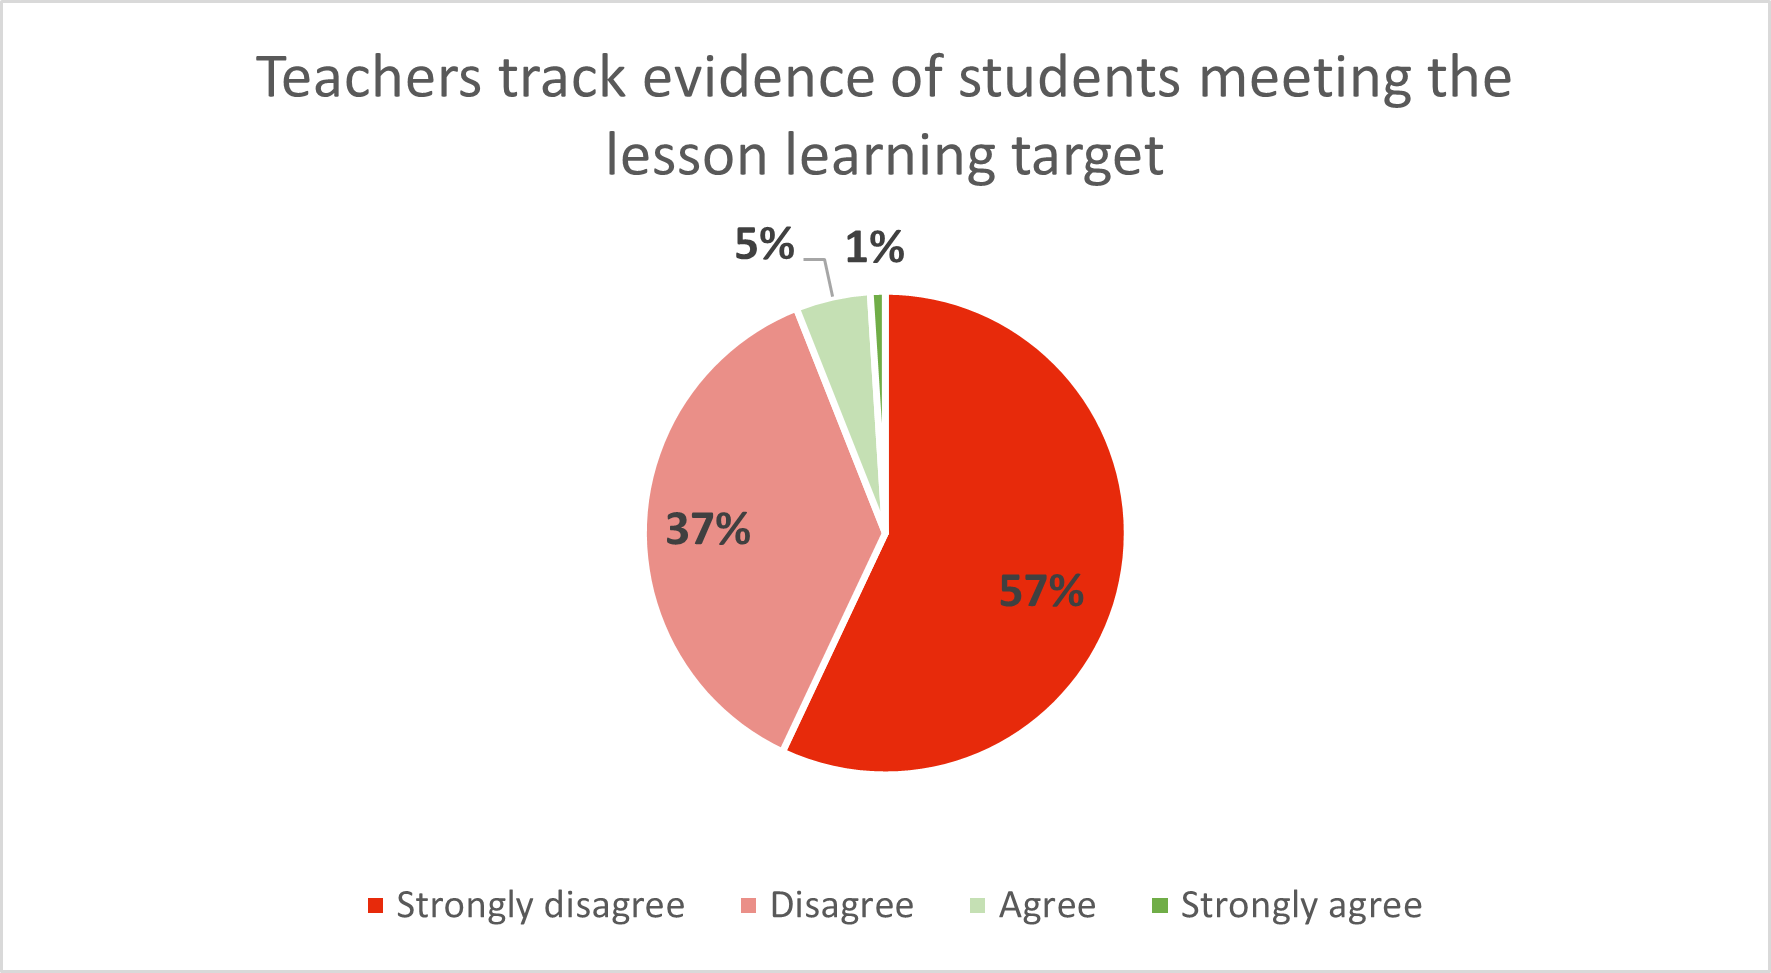 a pie graph showing Teachers track evidence of students meeting the lesson learning target. 57% of teachers strongly disagree, 37% disagree. only 6% agree or strongly agree